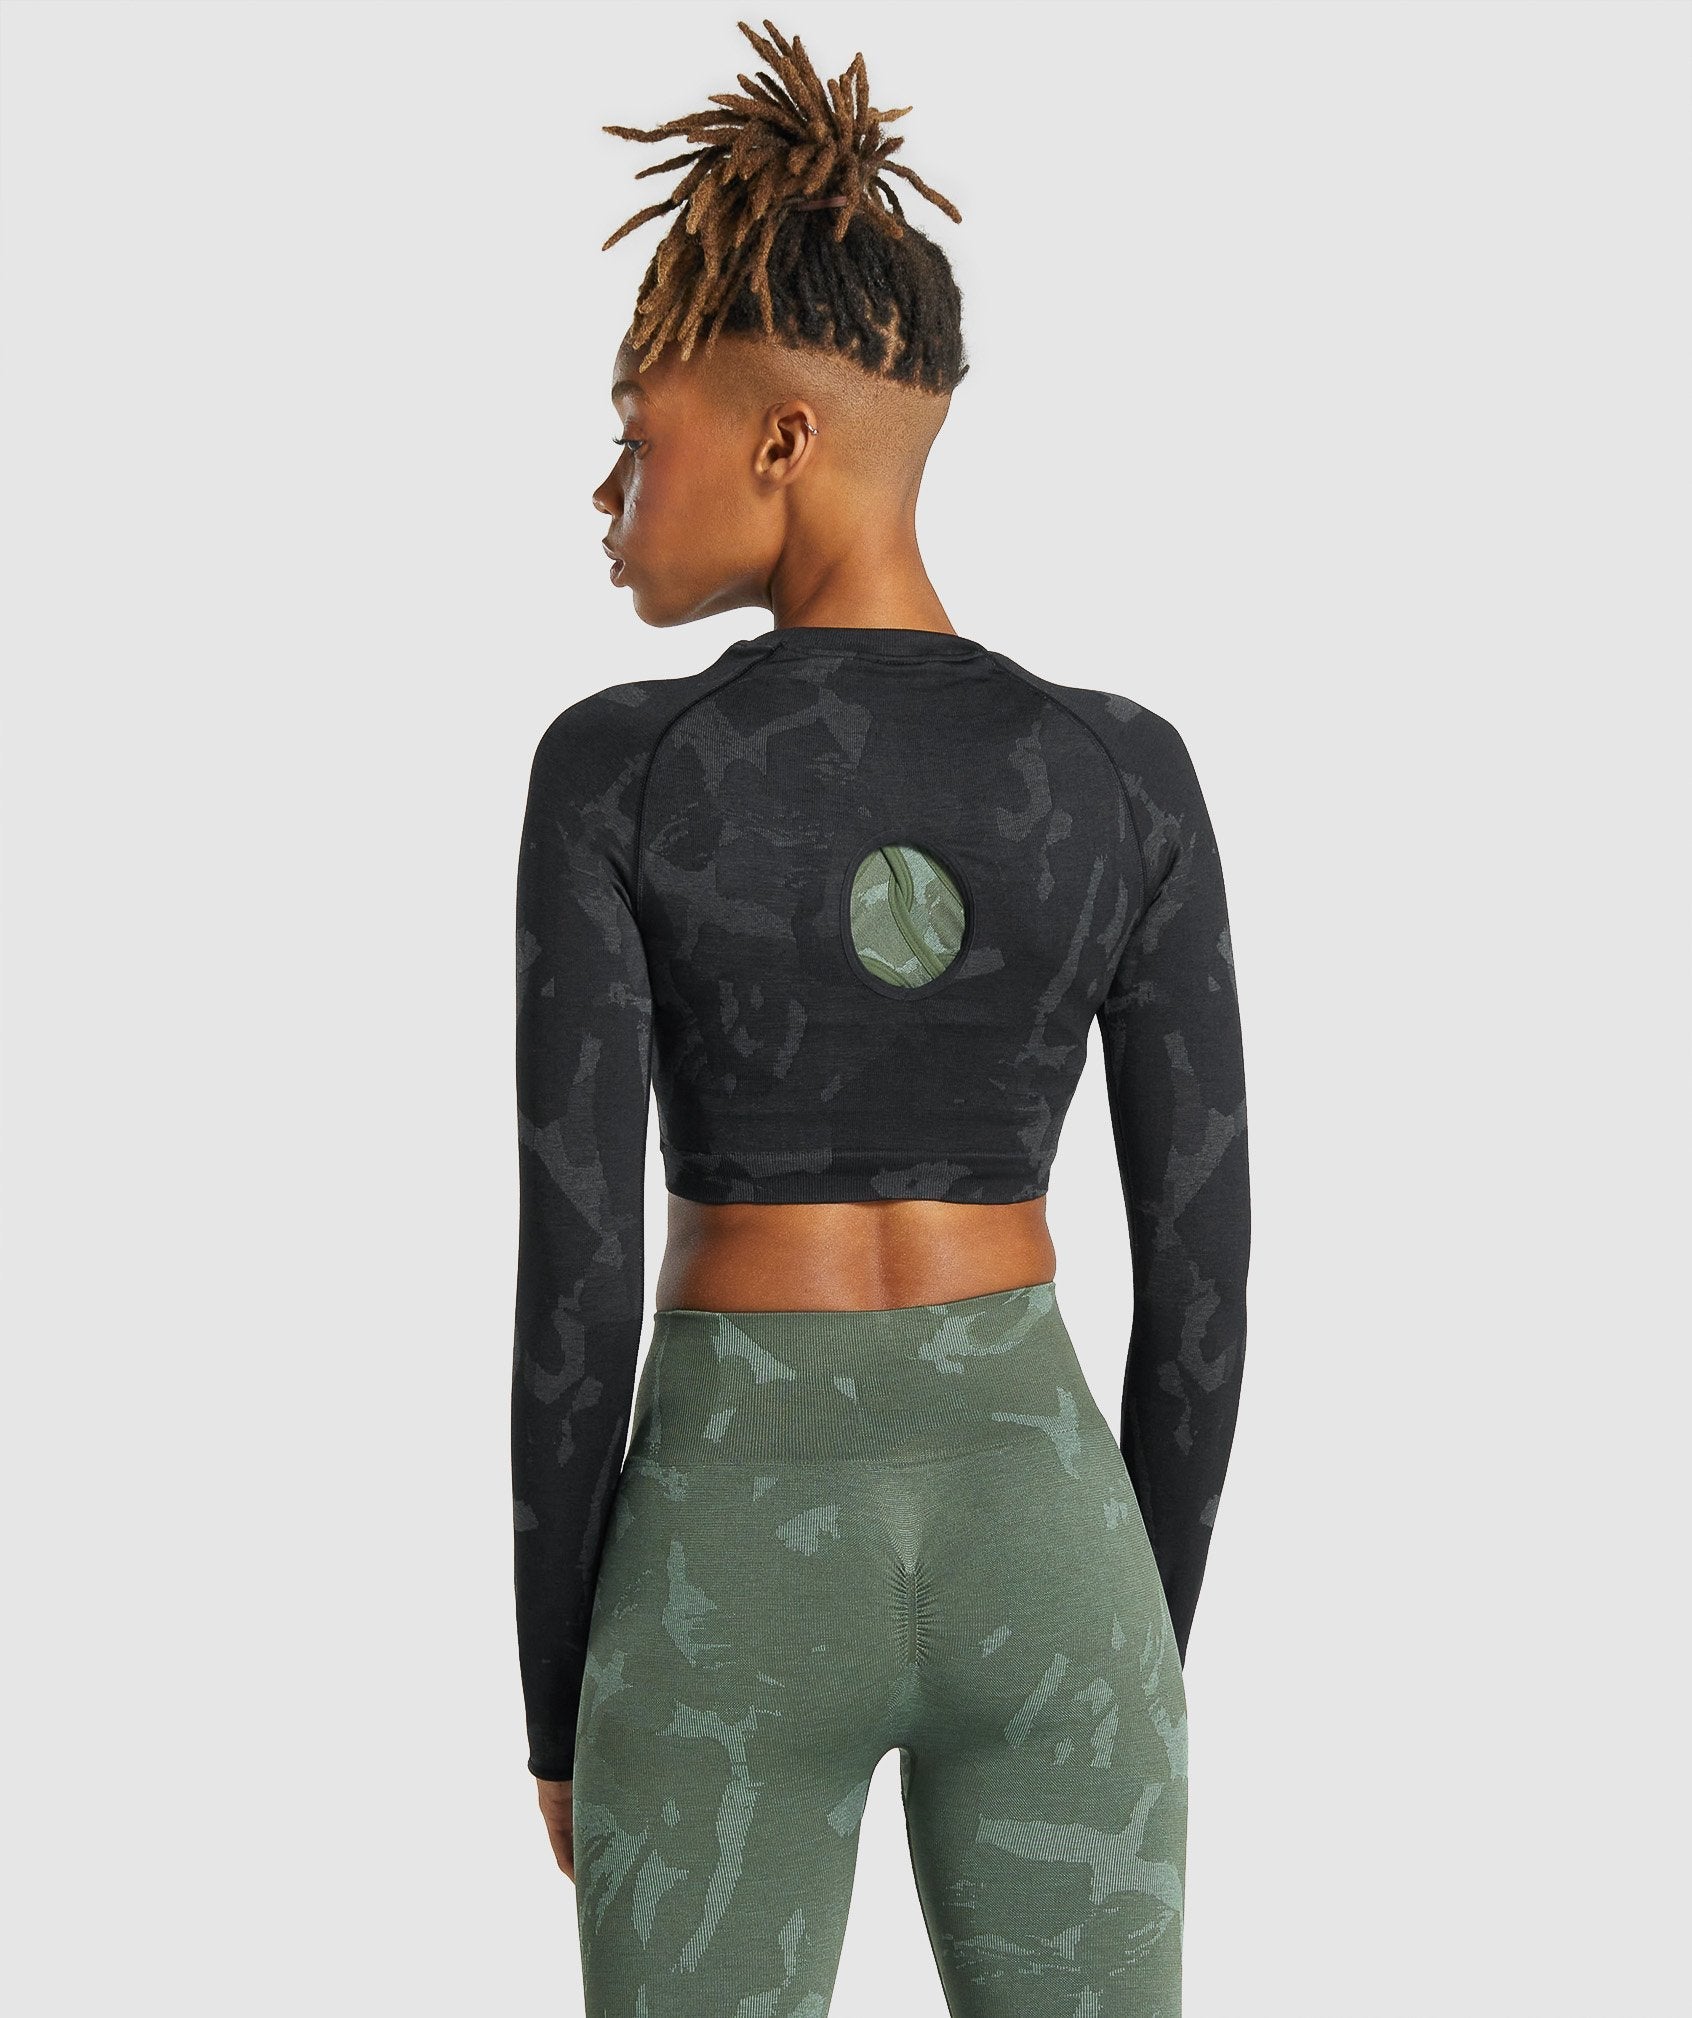 Gymshark Camo Crop Top Gray Size M - $27 (46% Off Retail) - From Cindy